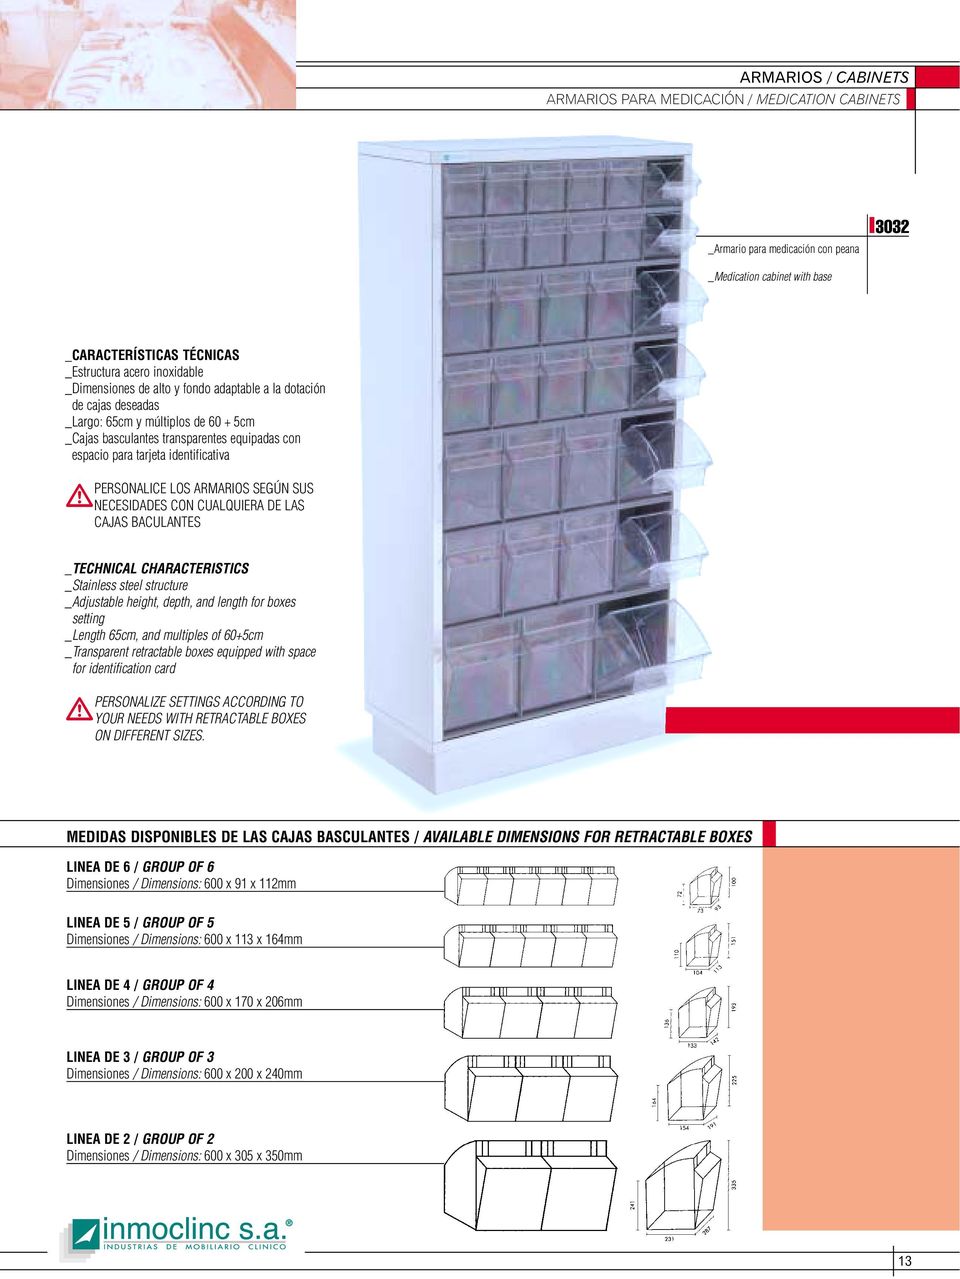 CAJAS BACULANTES _Adjustable height, depth, and length for boxes setting _Length 65cm, and multiples of 60+5cm _Transparent retractable boxes equipped with space for identification card PERSONALIZE